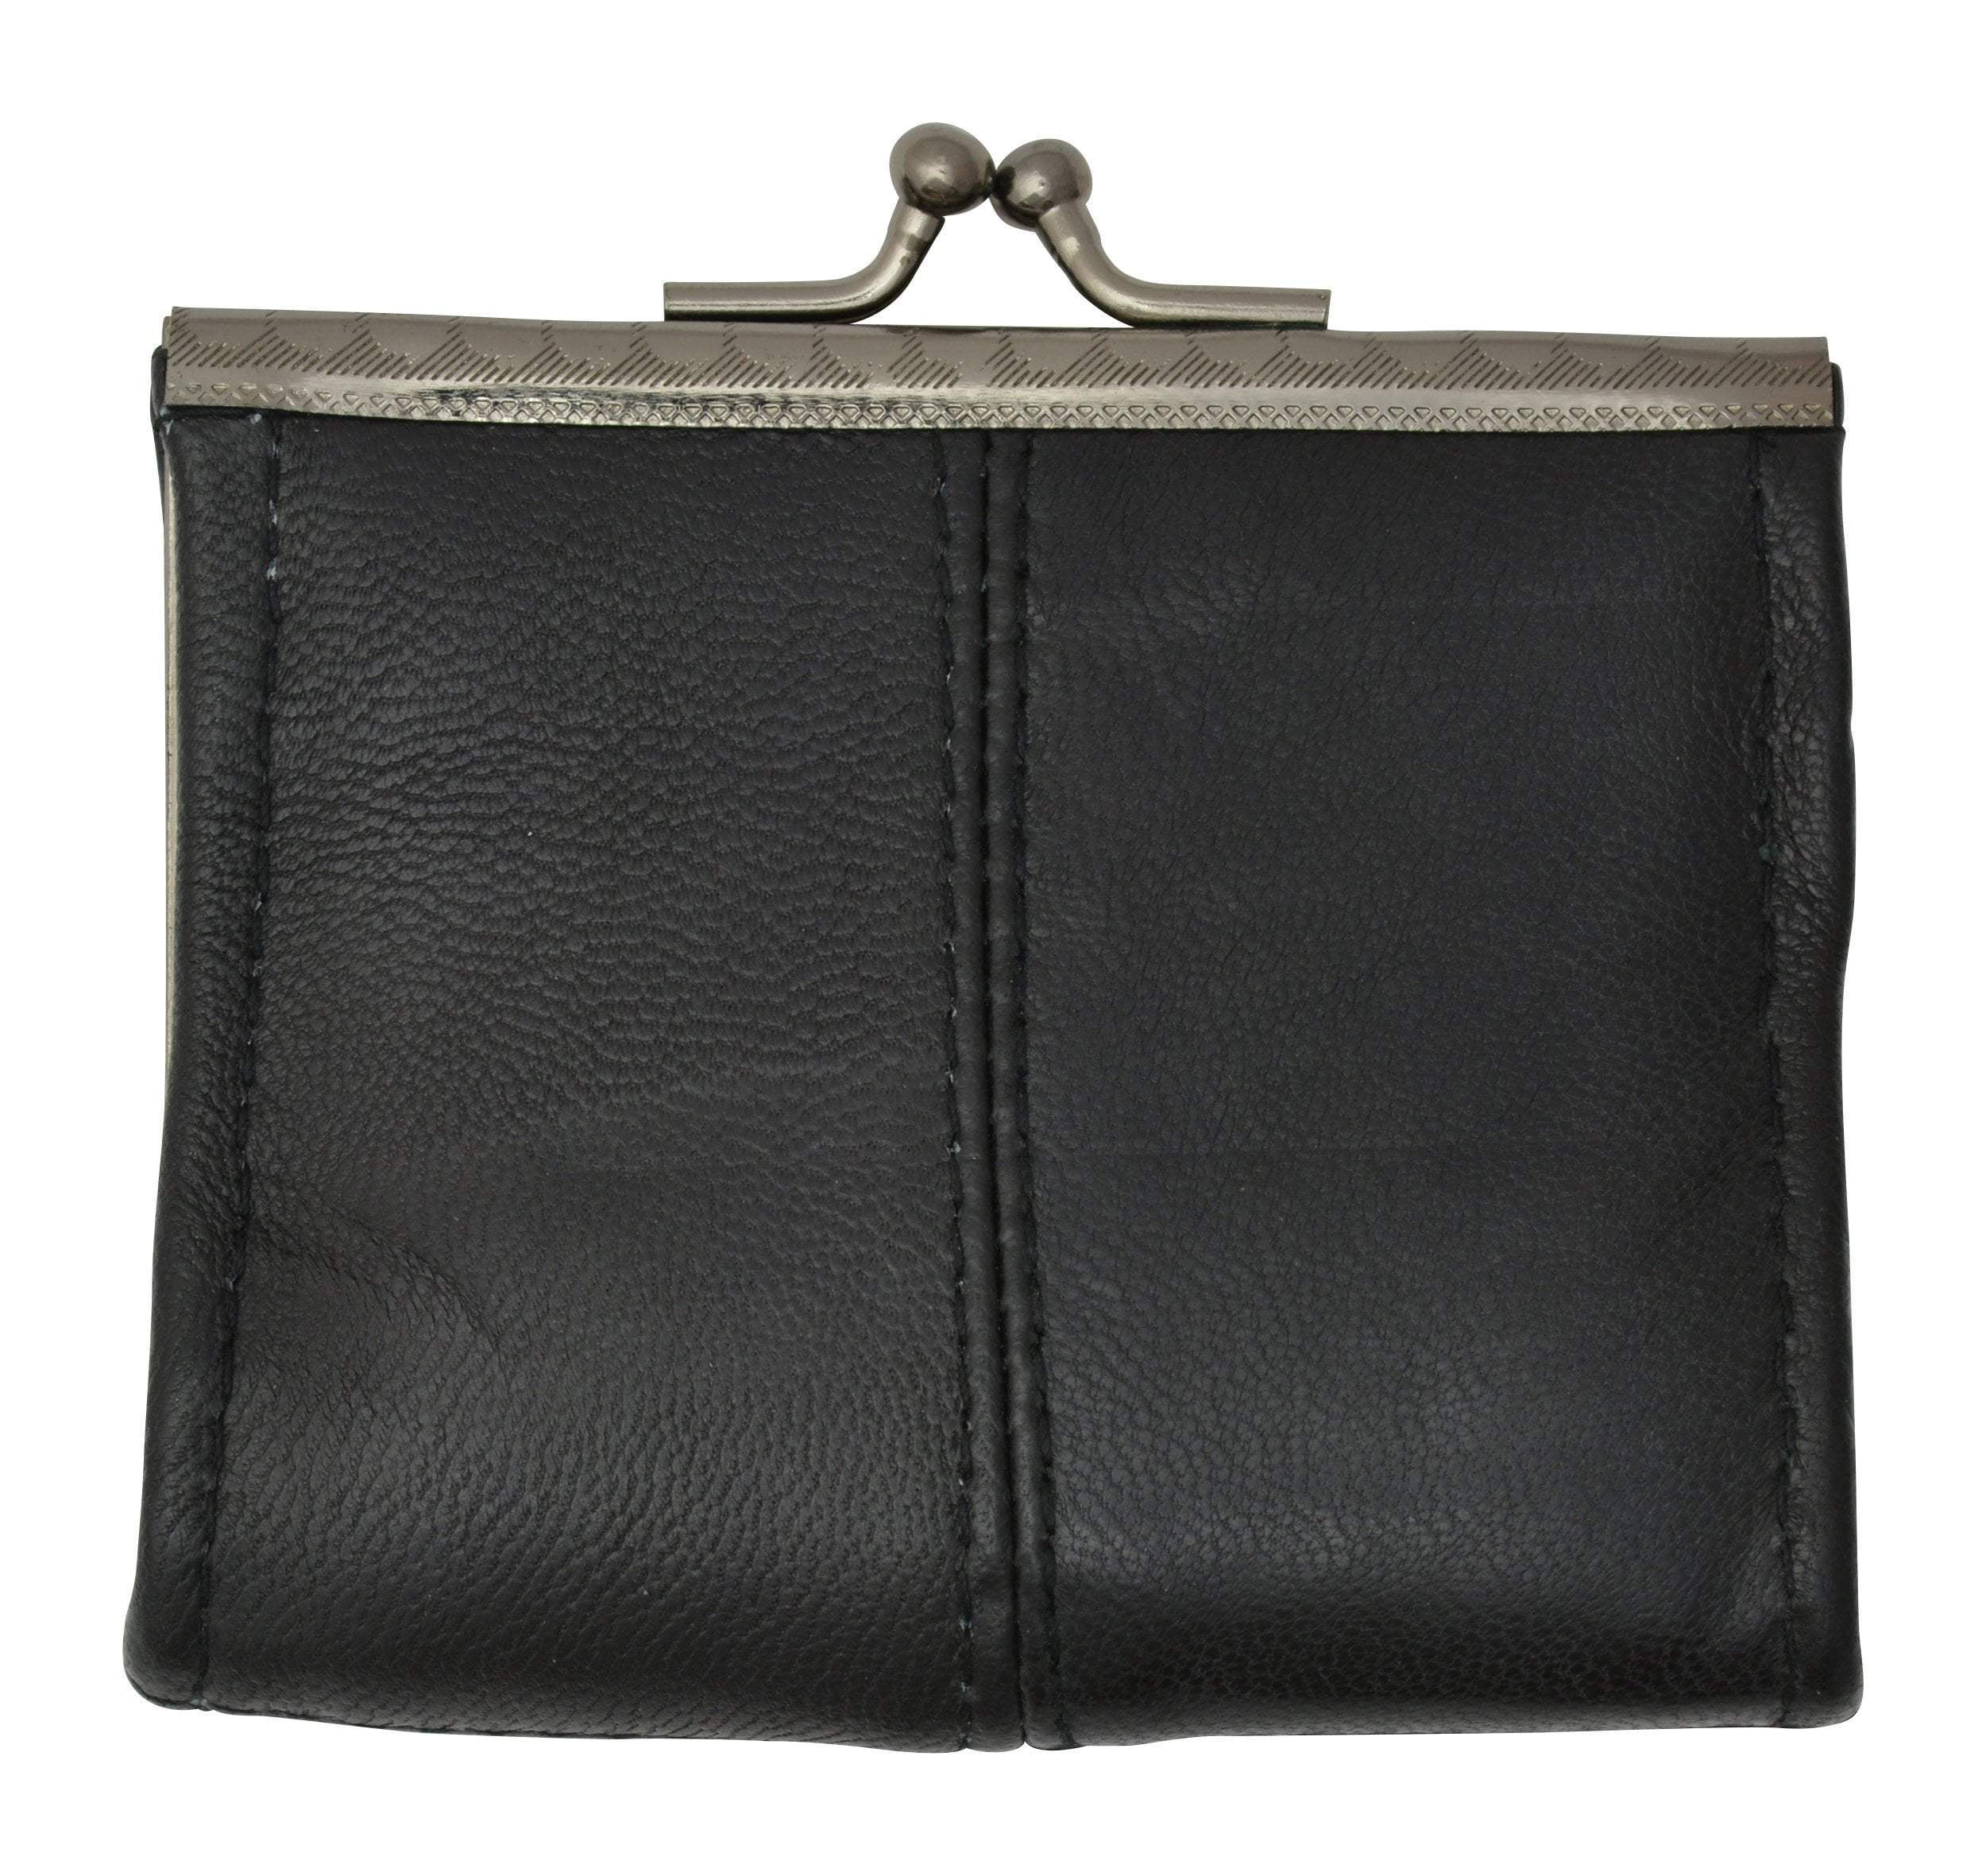 Marshal - Ladies Black Small Change Coin Purse With Twist Snap Closure - 0